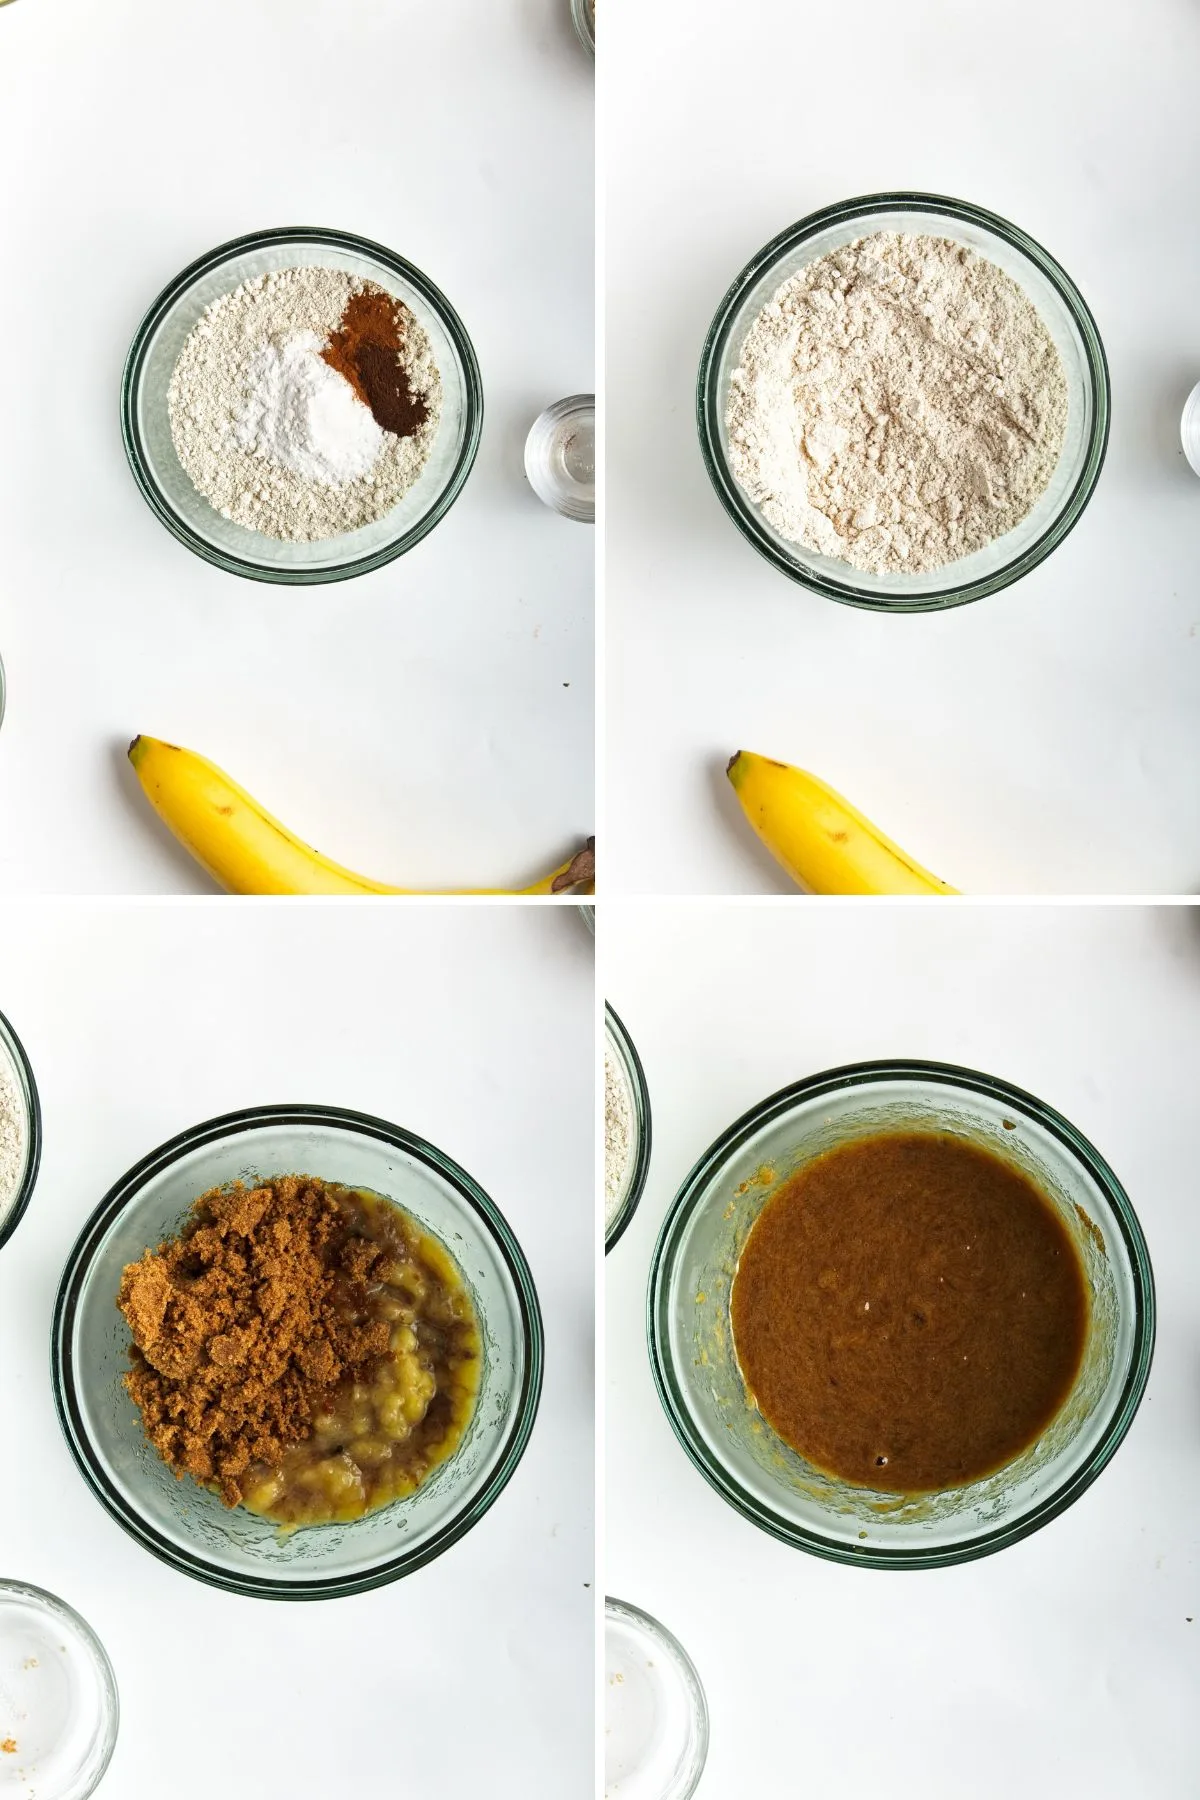 The first four images in a collage showing how to make homemade dairy free and gluten free banana oat muffins.